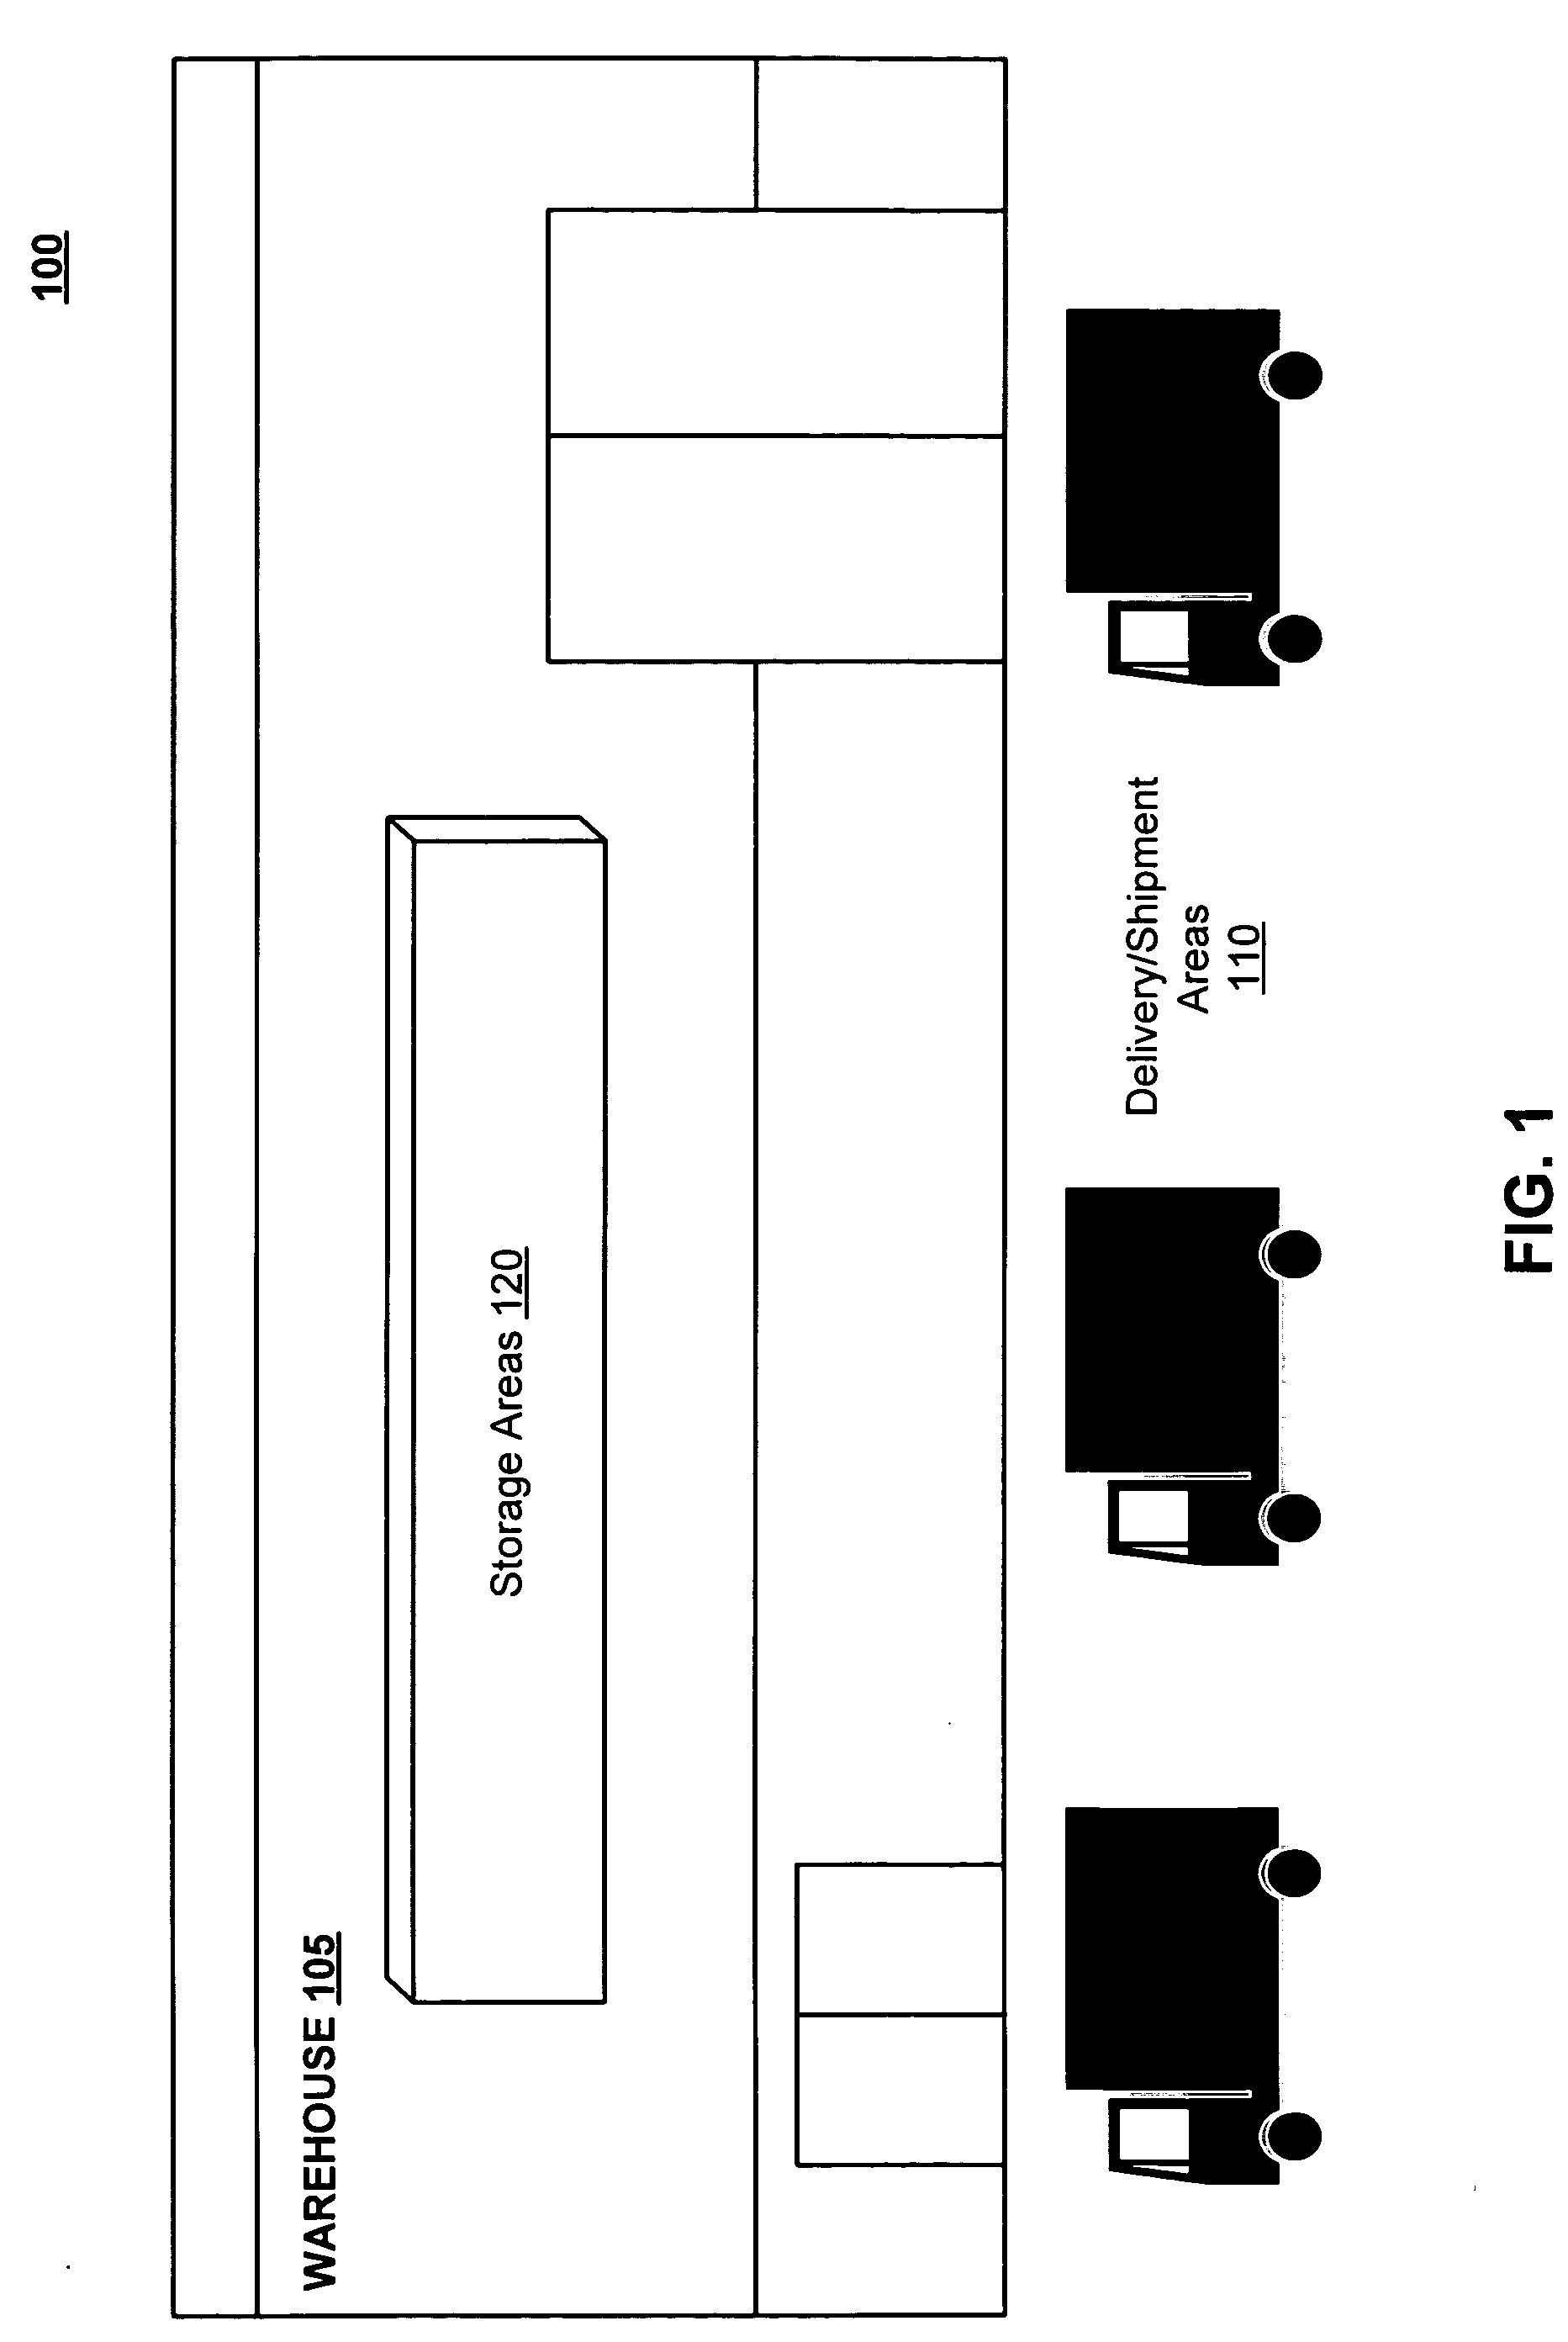 Systems and methods for automatically resolving stock discrepancies